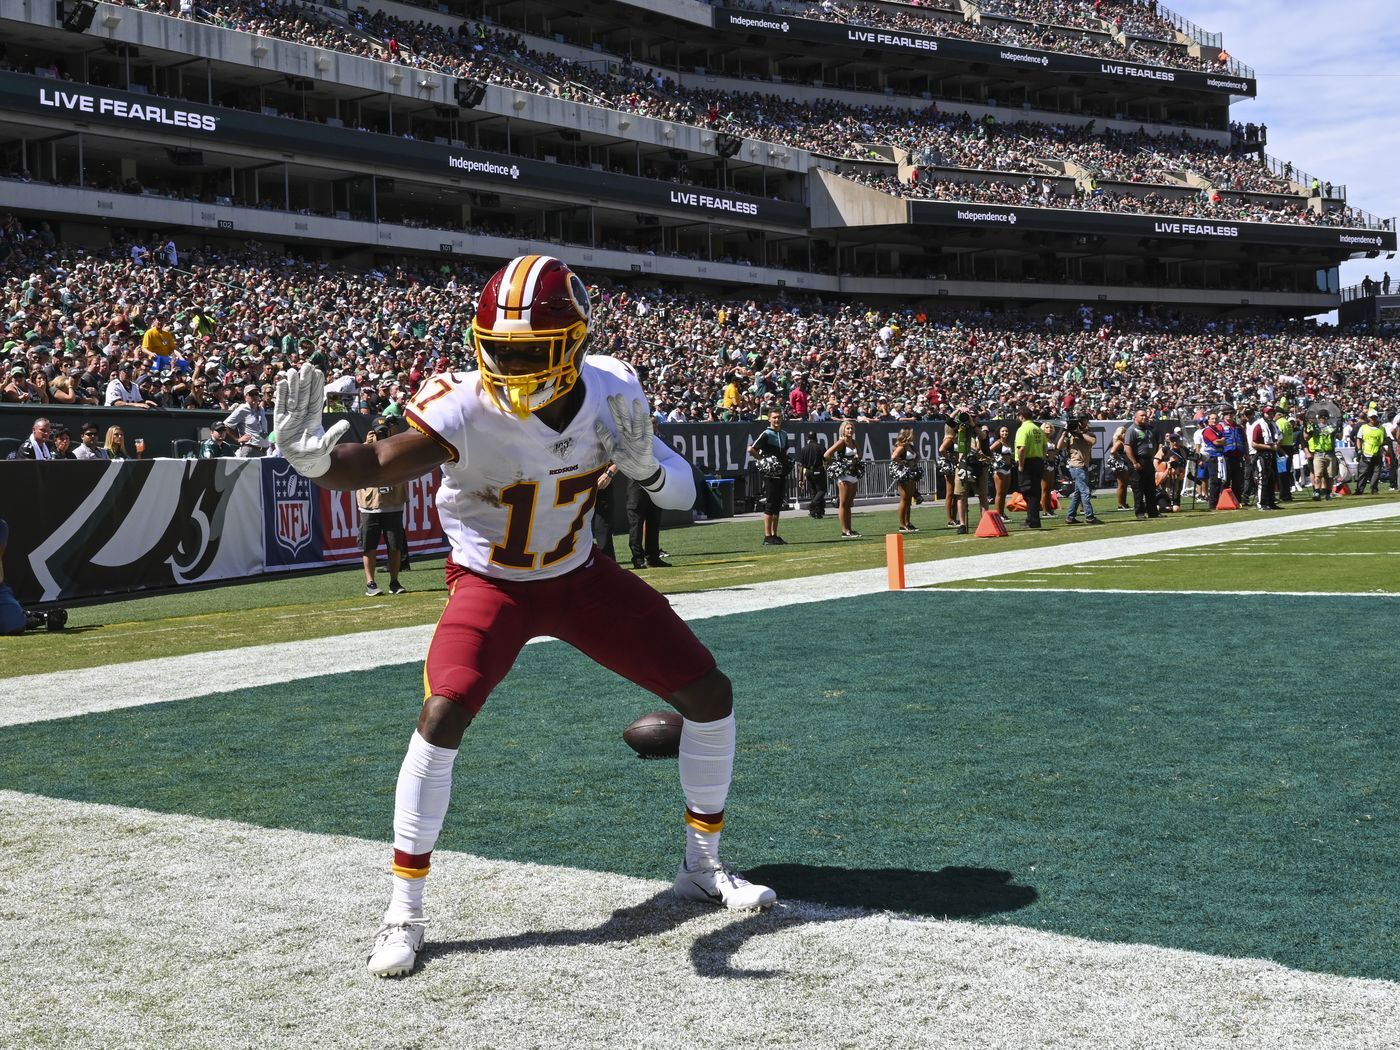 VOTE! Redskins WR Terry McLaurin nominated for NFL Rookie of the Week